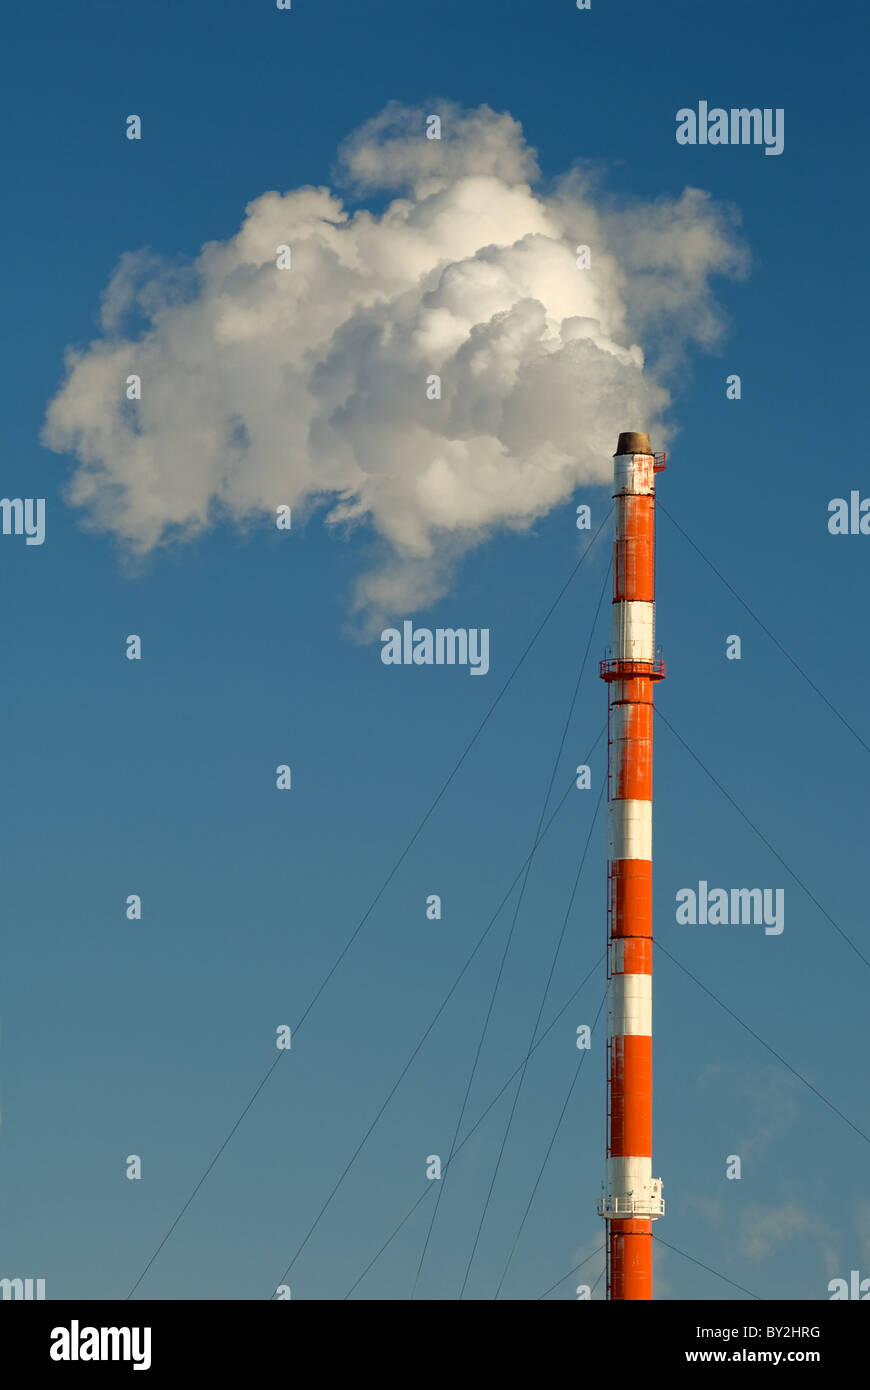 Smoke, gas and steam billows from a smokestack against a blue sky. Stock Photo